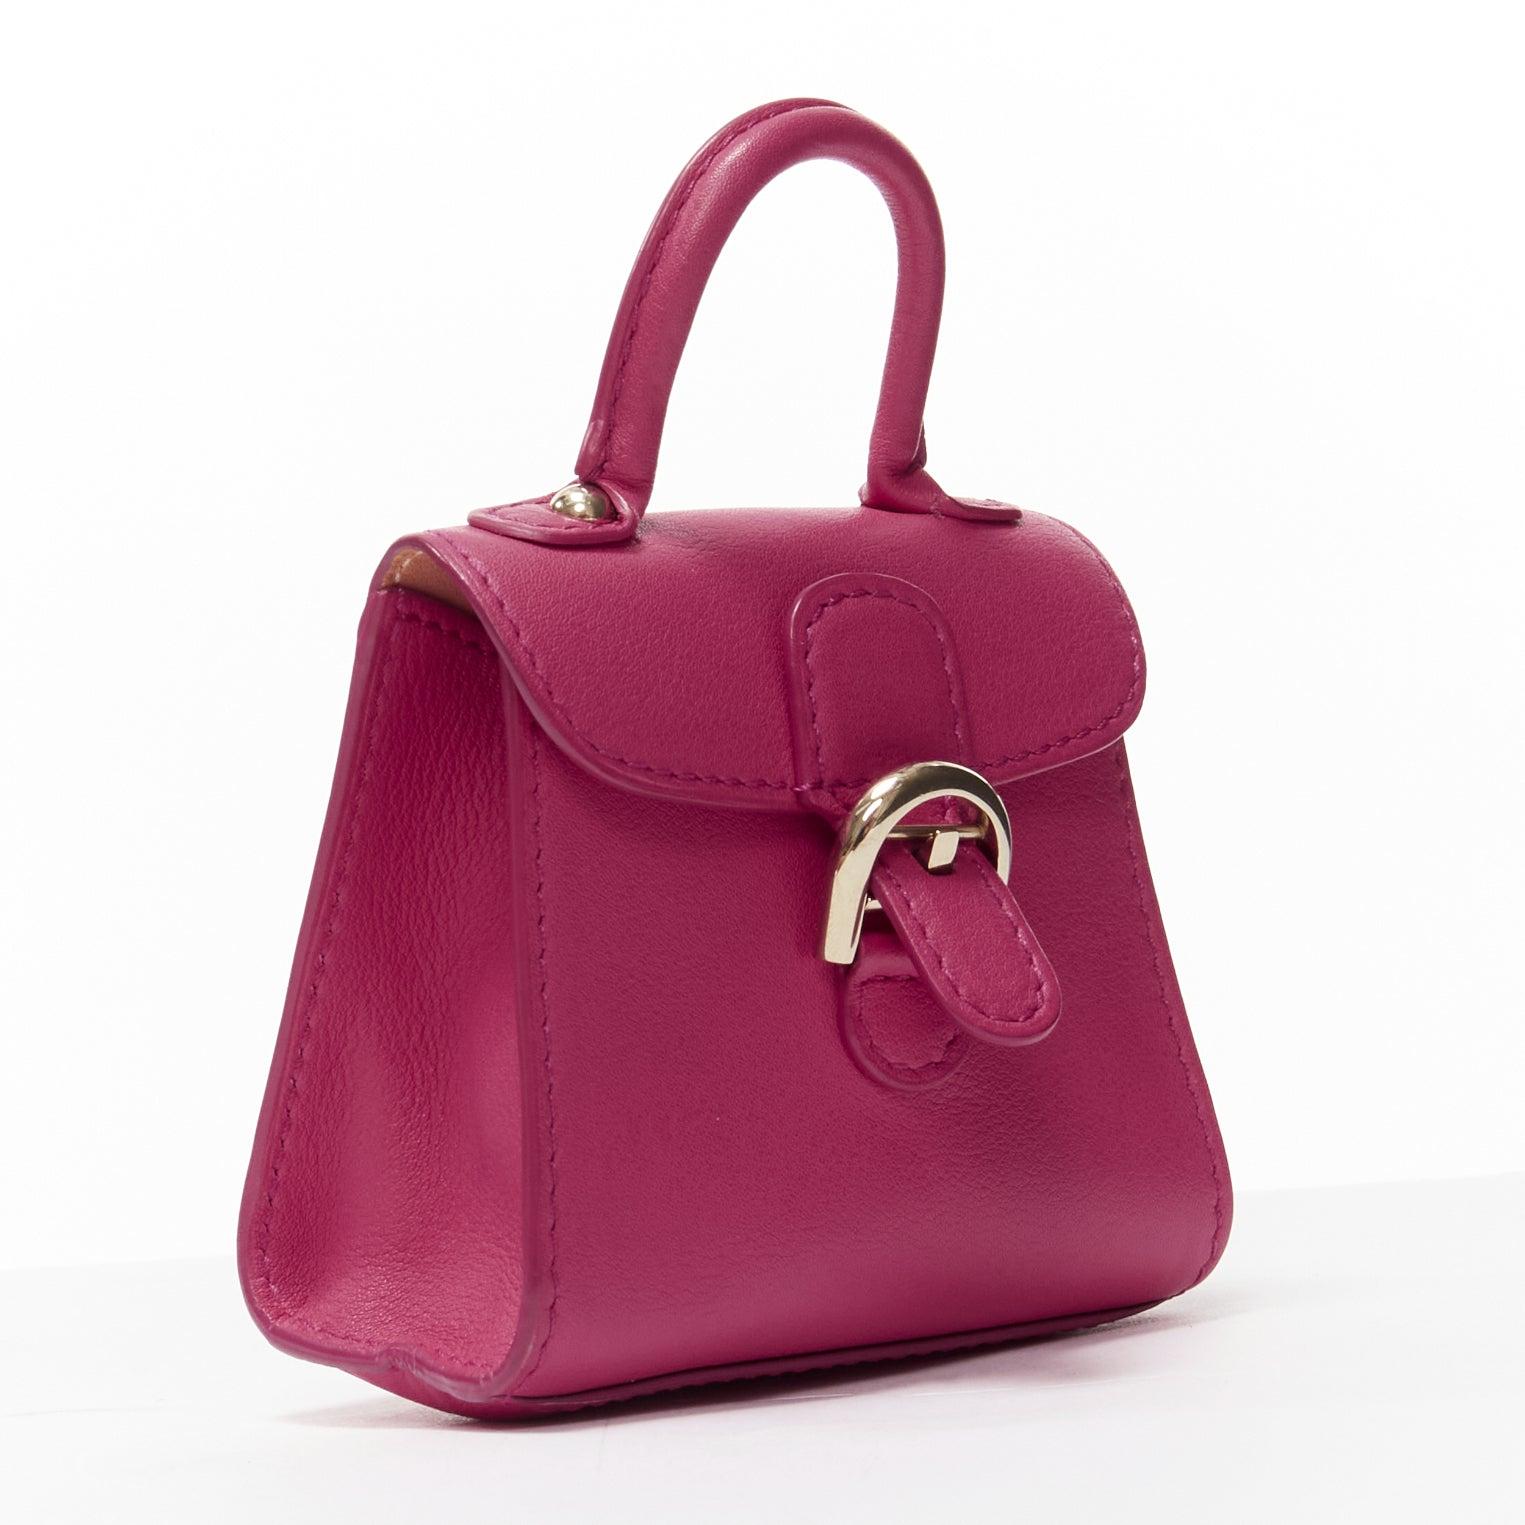 DELVAUX Mini Brilliant rose indien pink calfskin micro bag charm
Reference: TGAS/D00677
Brand: Delvaux
Model: Mini Brilliant Charm
Material: Leather, Metal
Color: Pink
Pattern: Solid
Closure: Belt
Lining: Nude Leather
Extra Details: Calfskin Mini